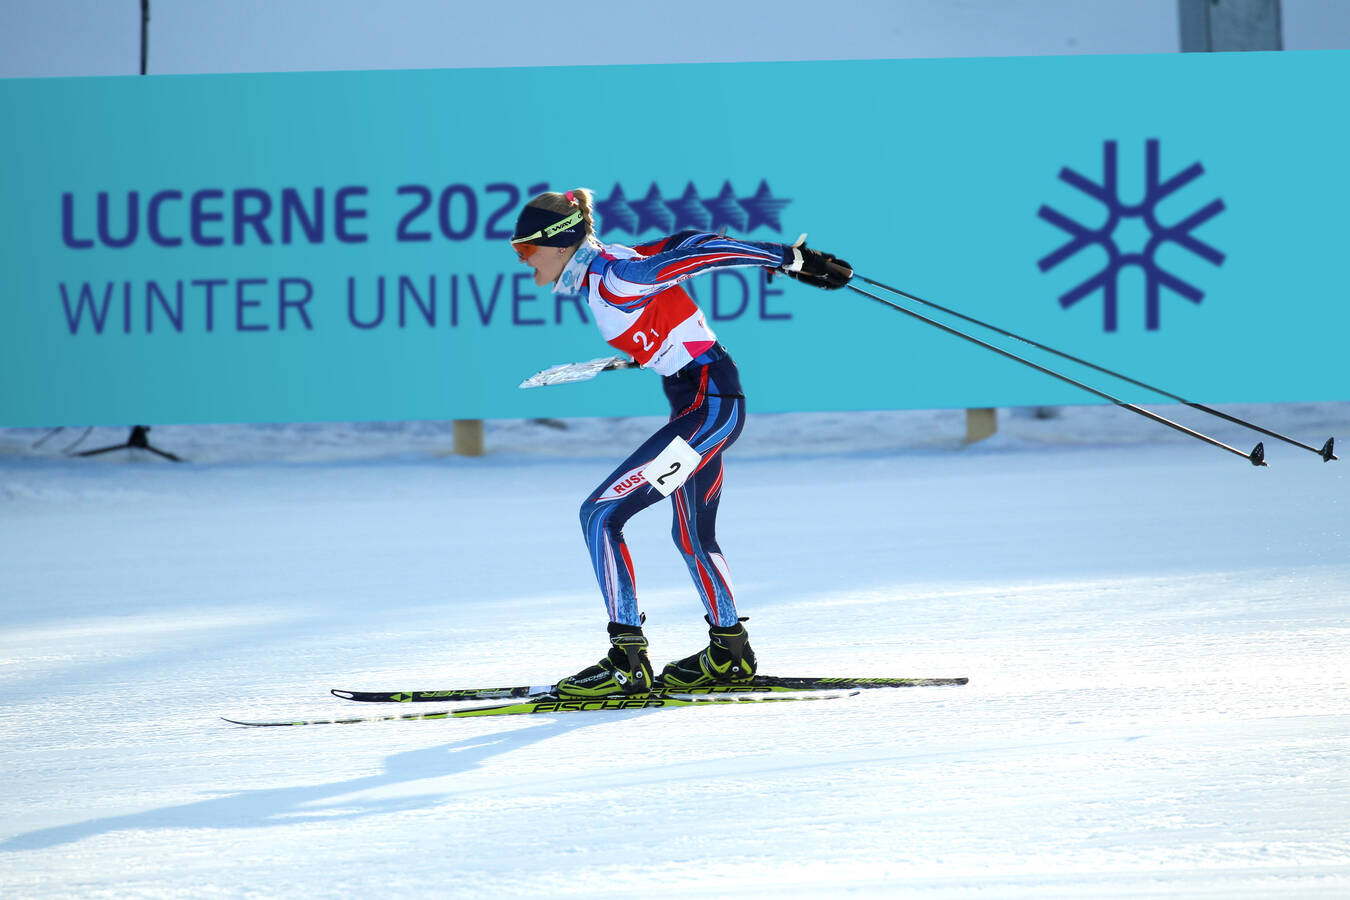 Gericke sponsors the Winter Universiade in Switzerland The Gericke Group supports the Winter Universiade because of commitment, a good organisation of training and studies as well as discipline.